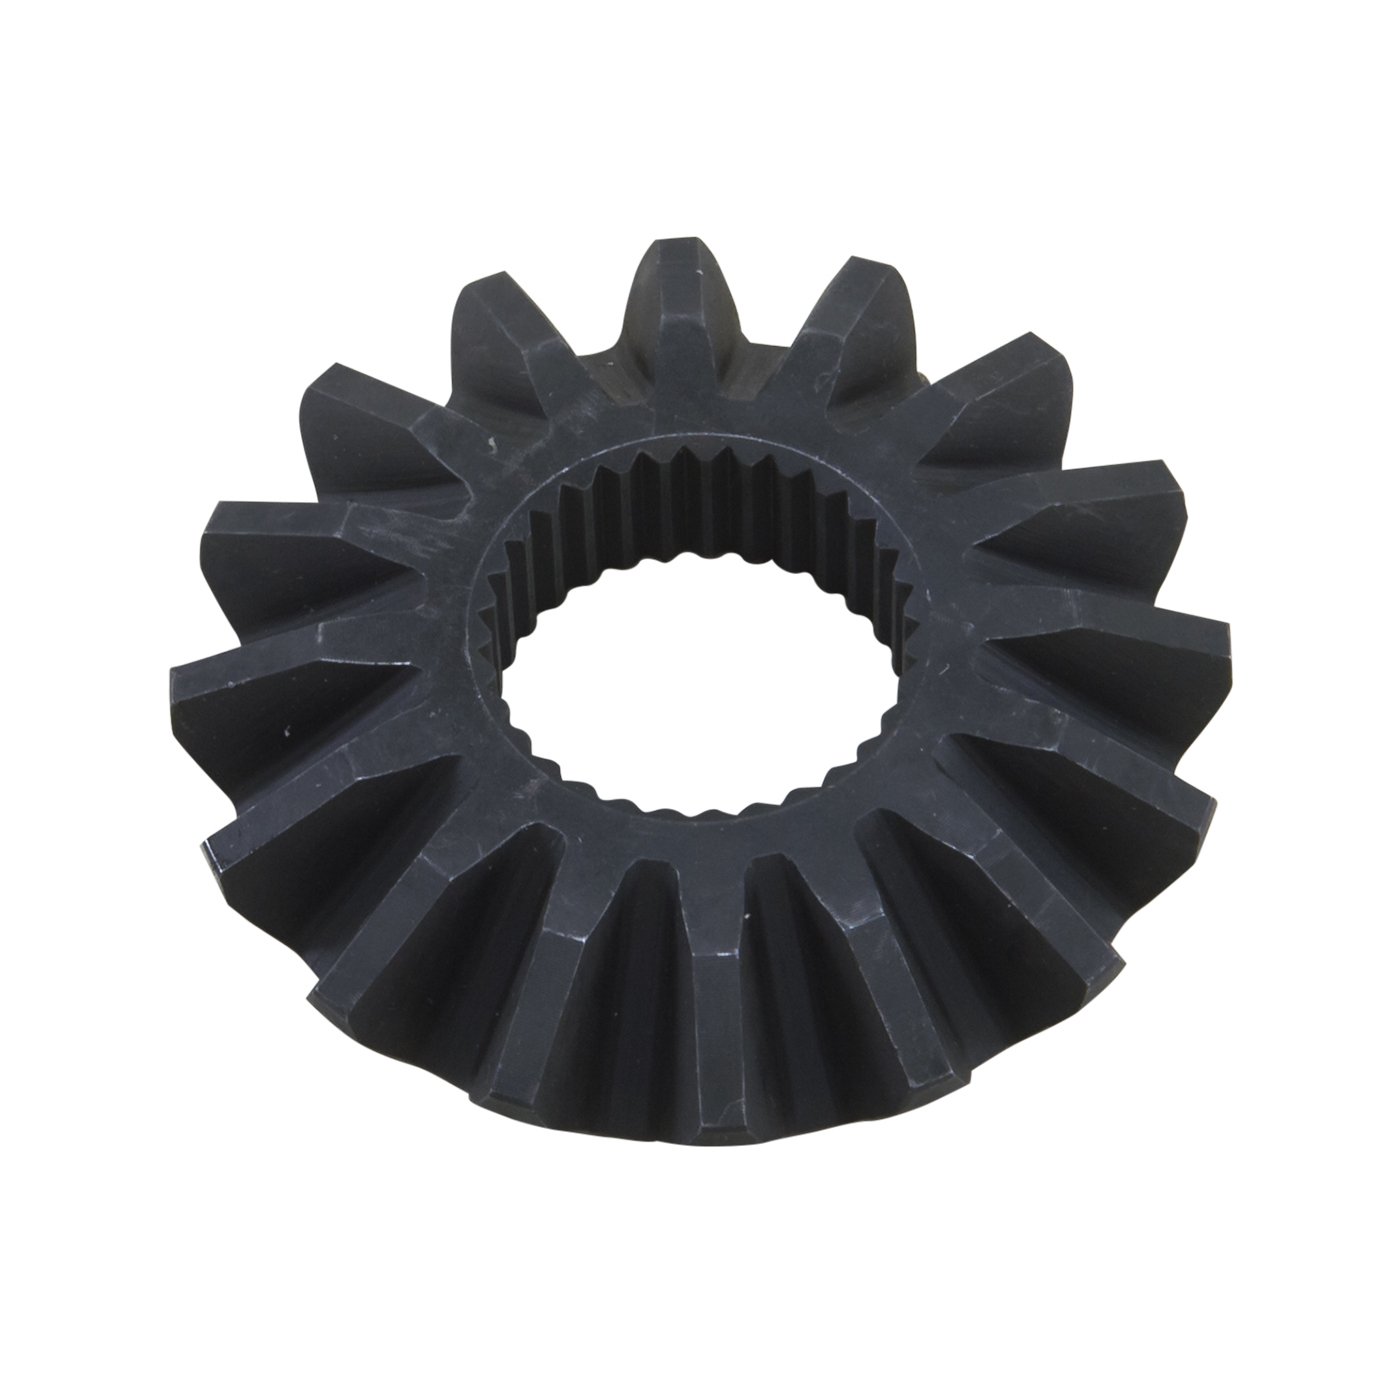 Flat side gear without hub for 9" Ford with 31 splines. 